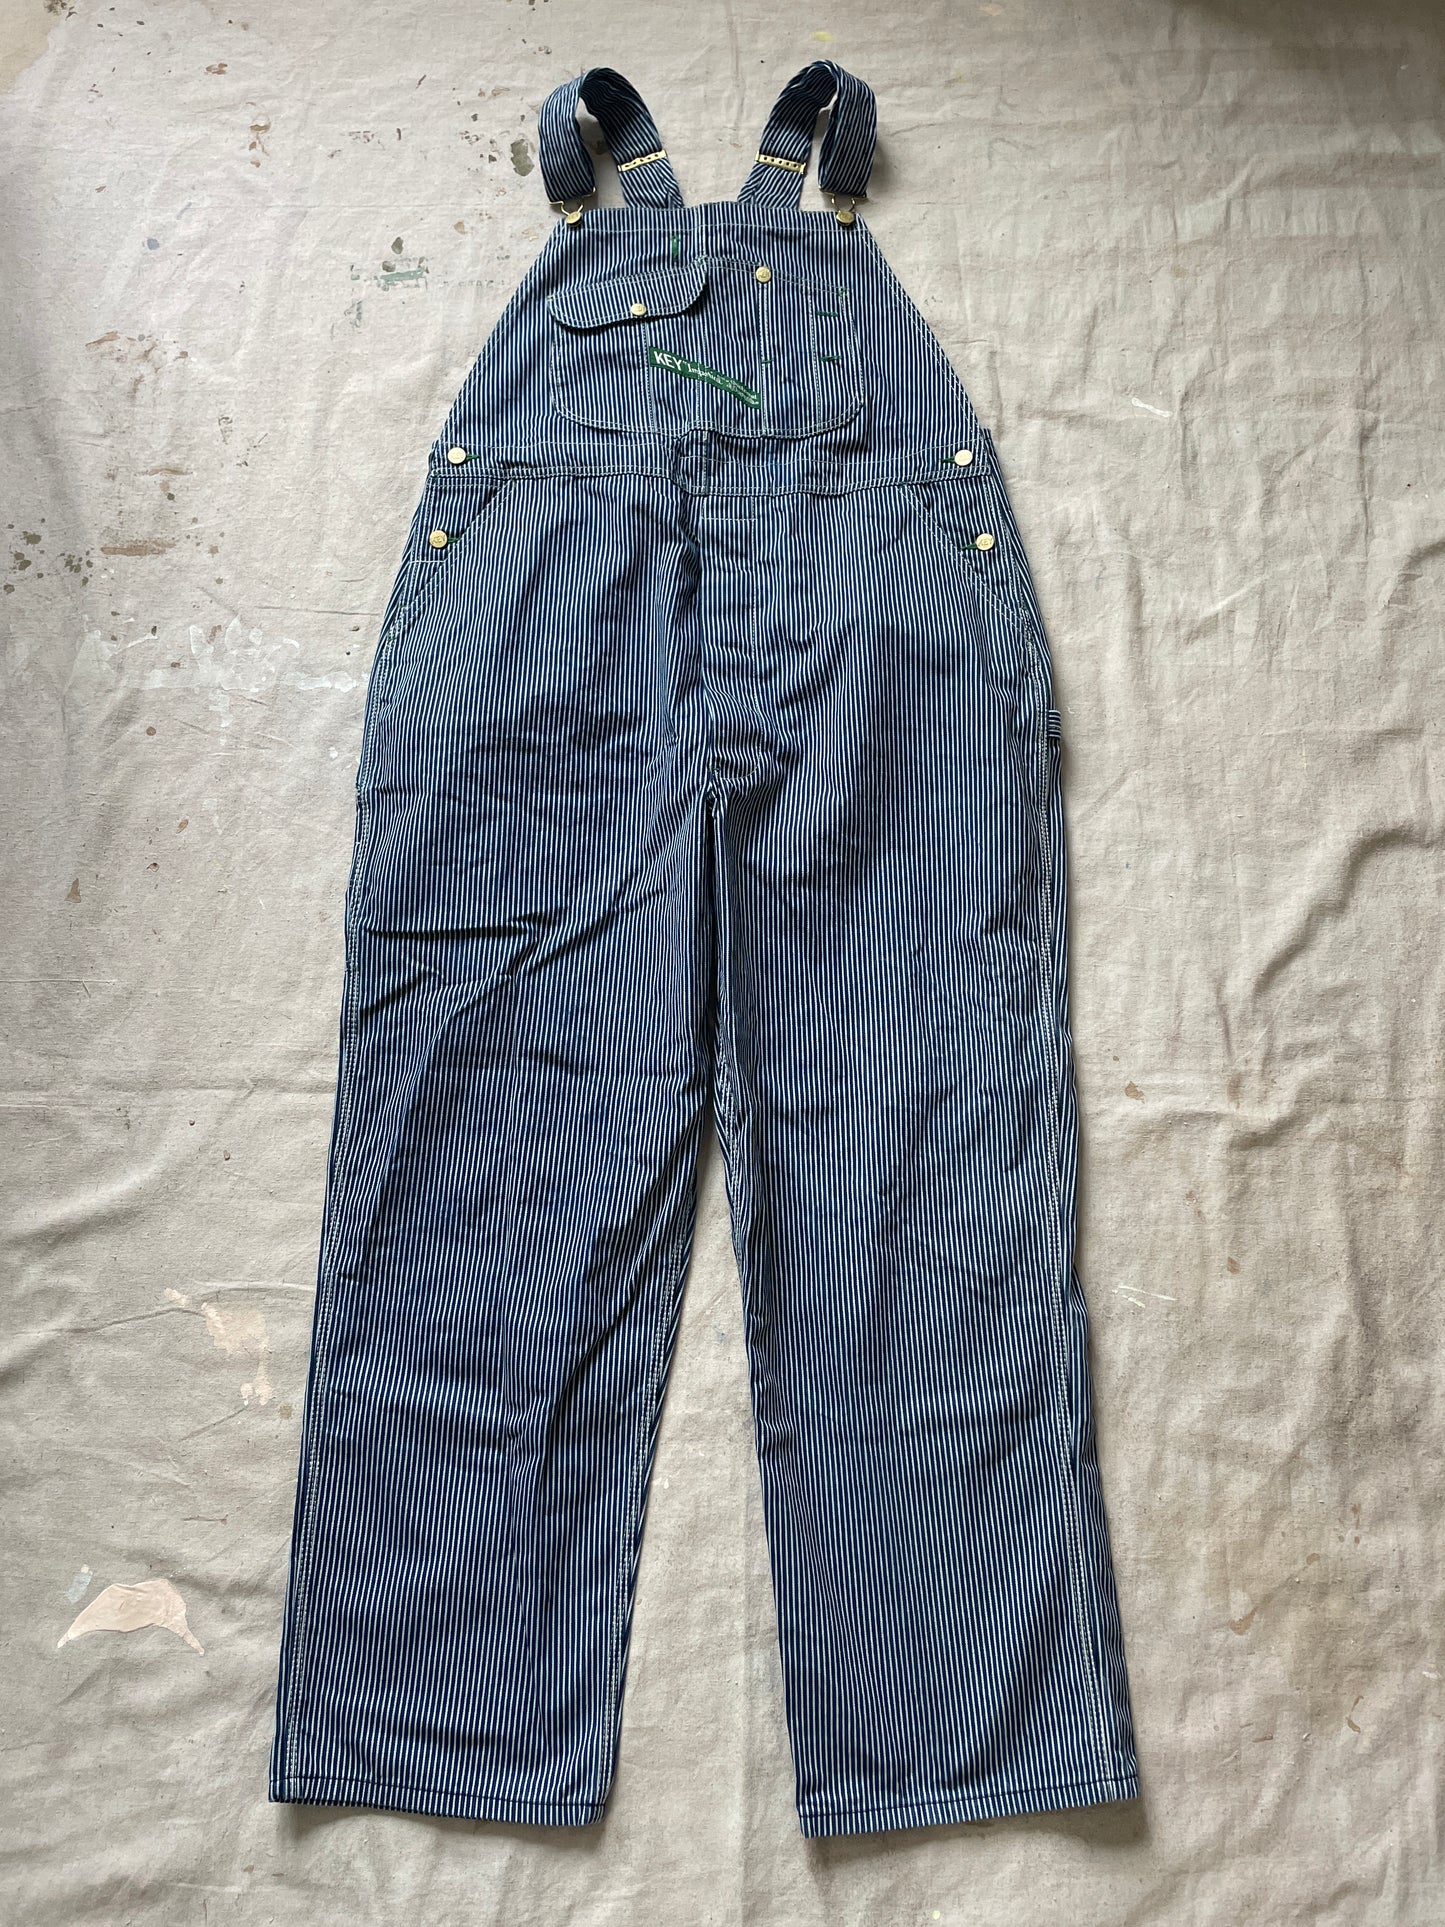 90s Key Imperial Hickory Stripe Overalls